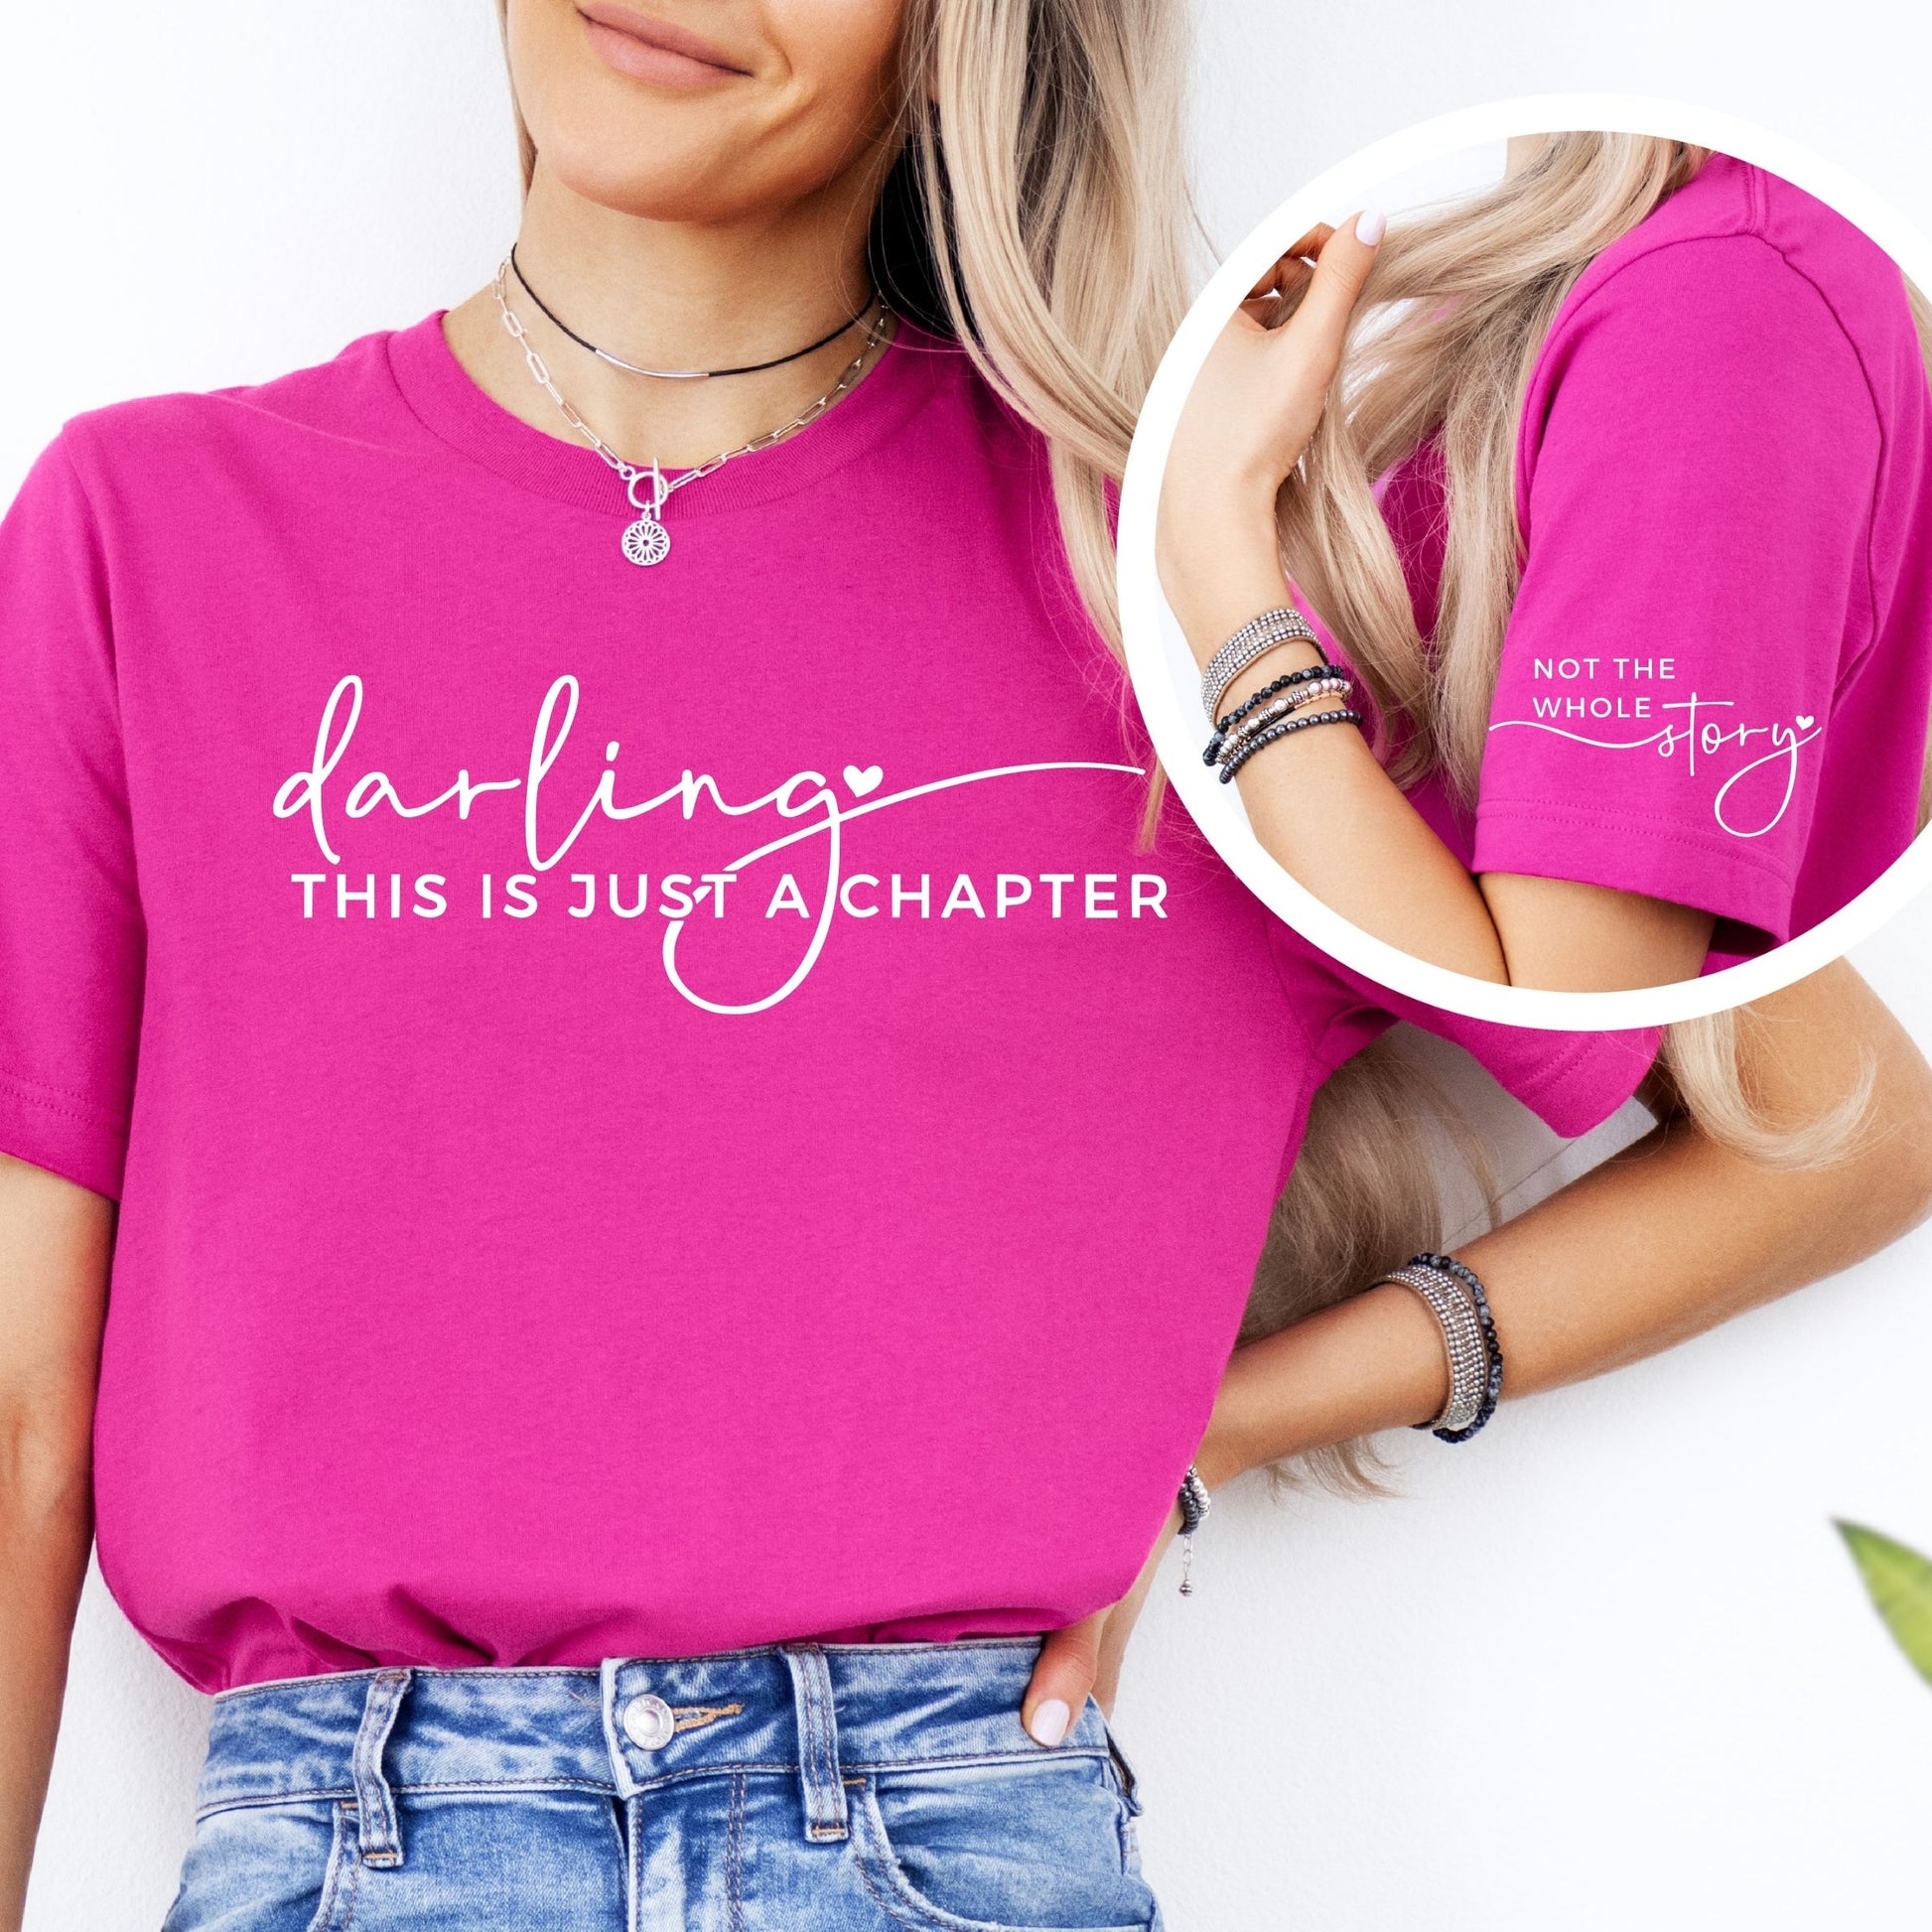 Darling This Is Just A Chapter T-Shirt - Mardonyx T-Shirt XS / Berry